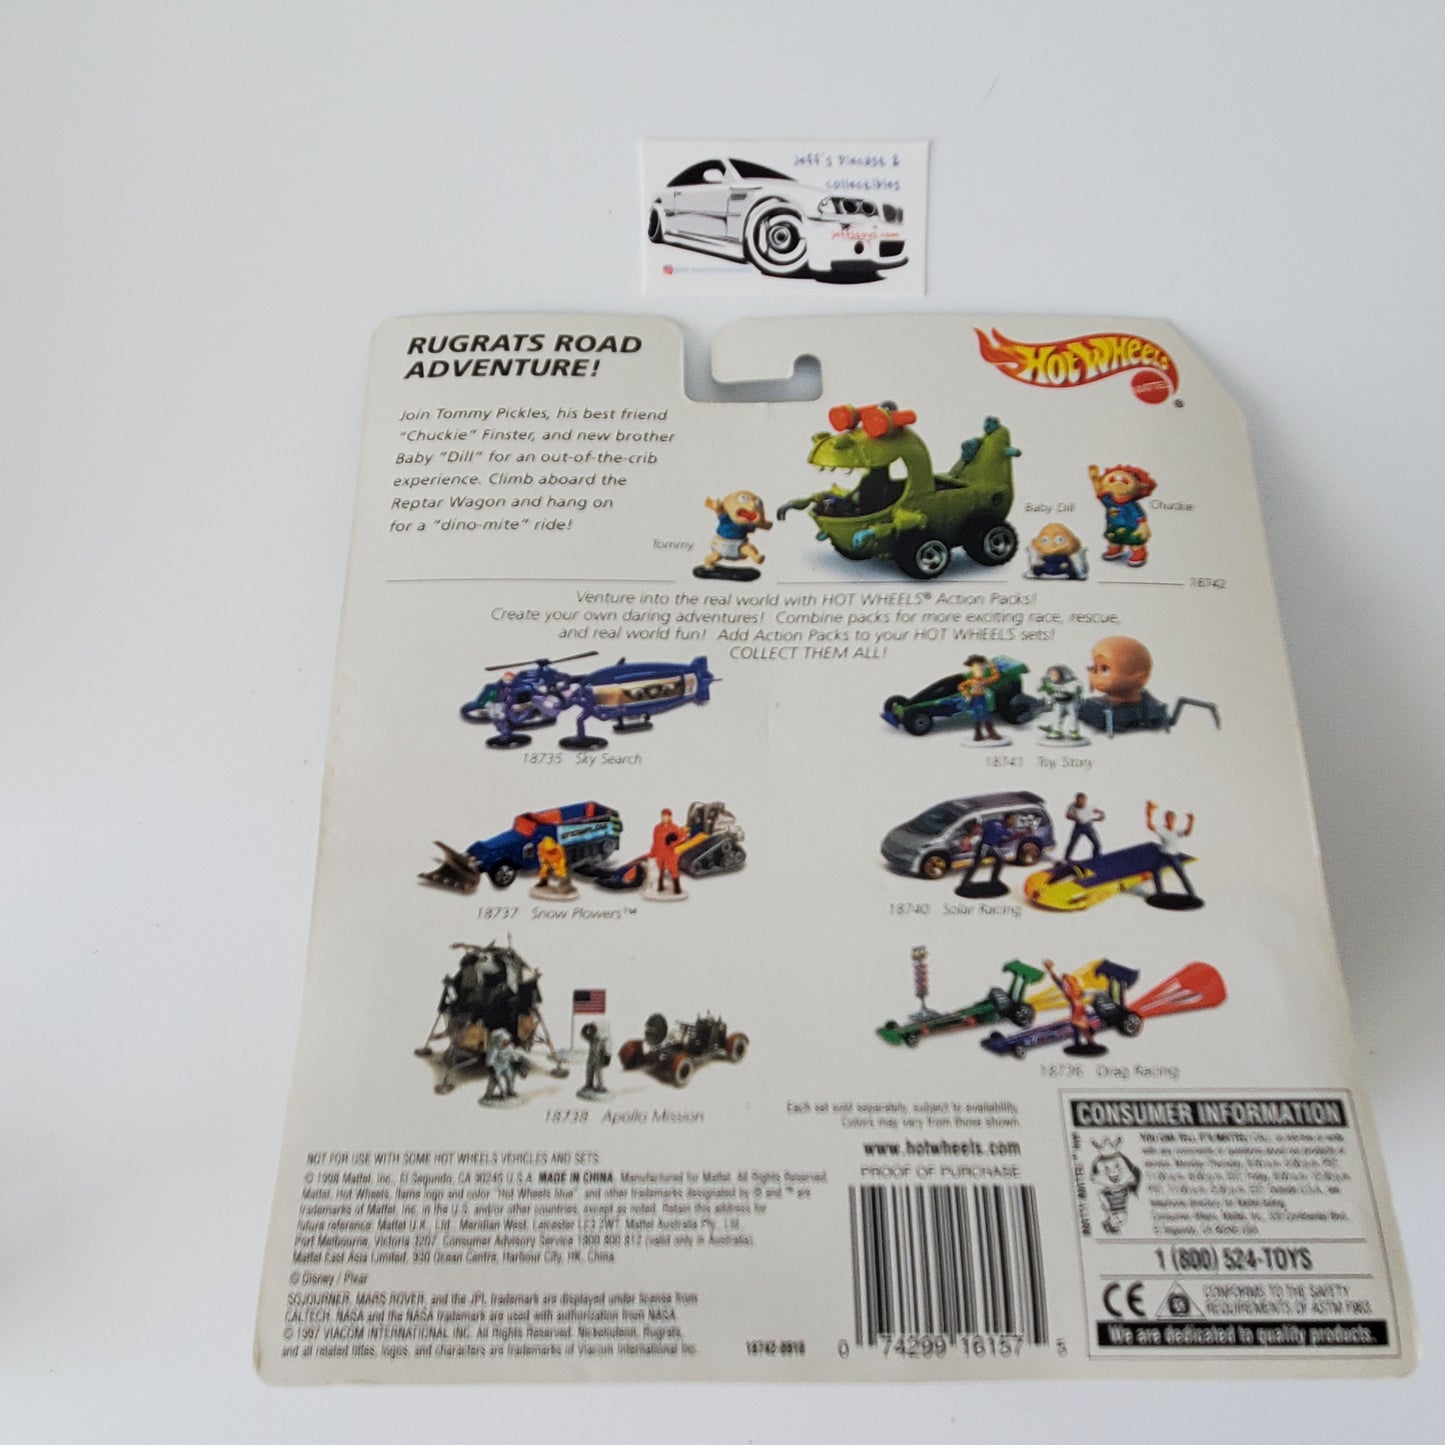 1998 Hot Wheels Action Rugrats Chucky Tommy Reptar Wagon